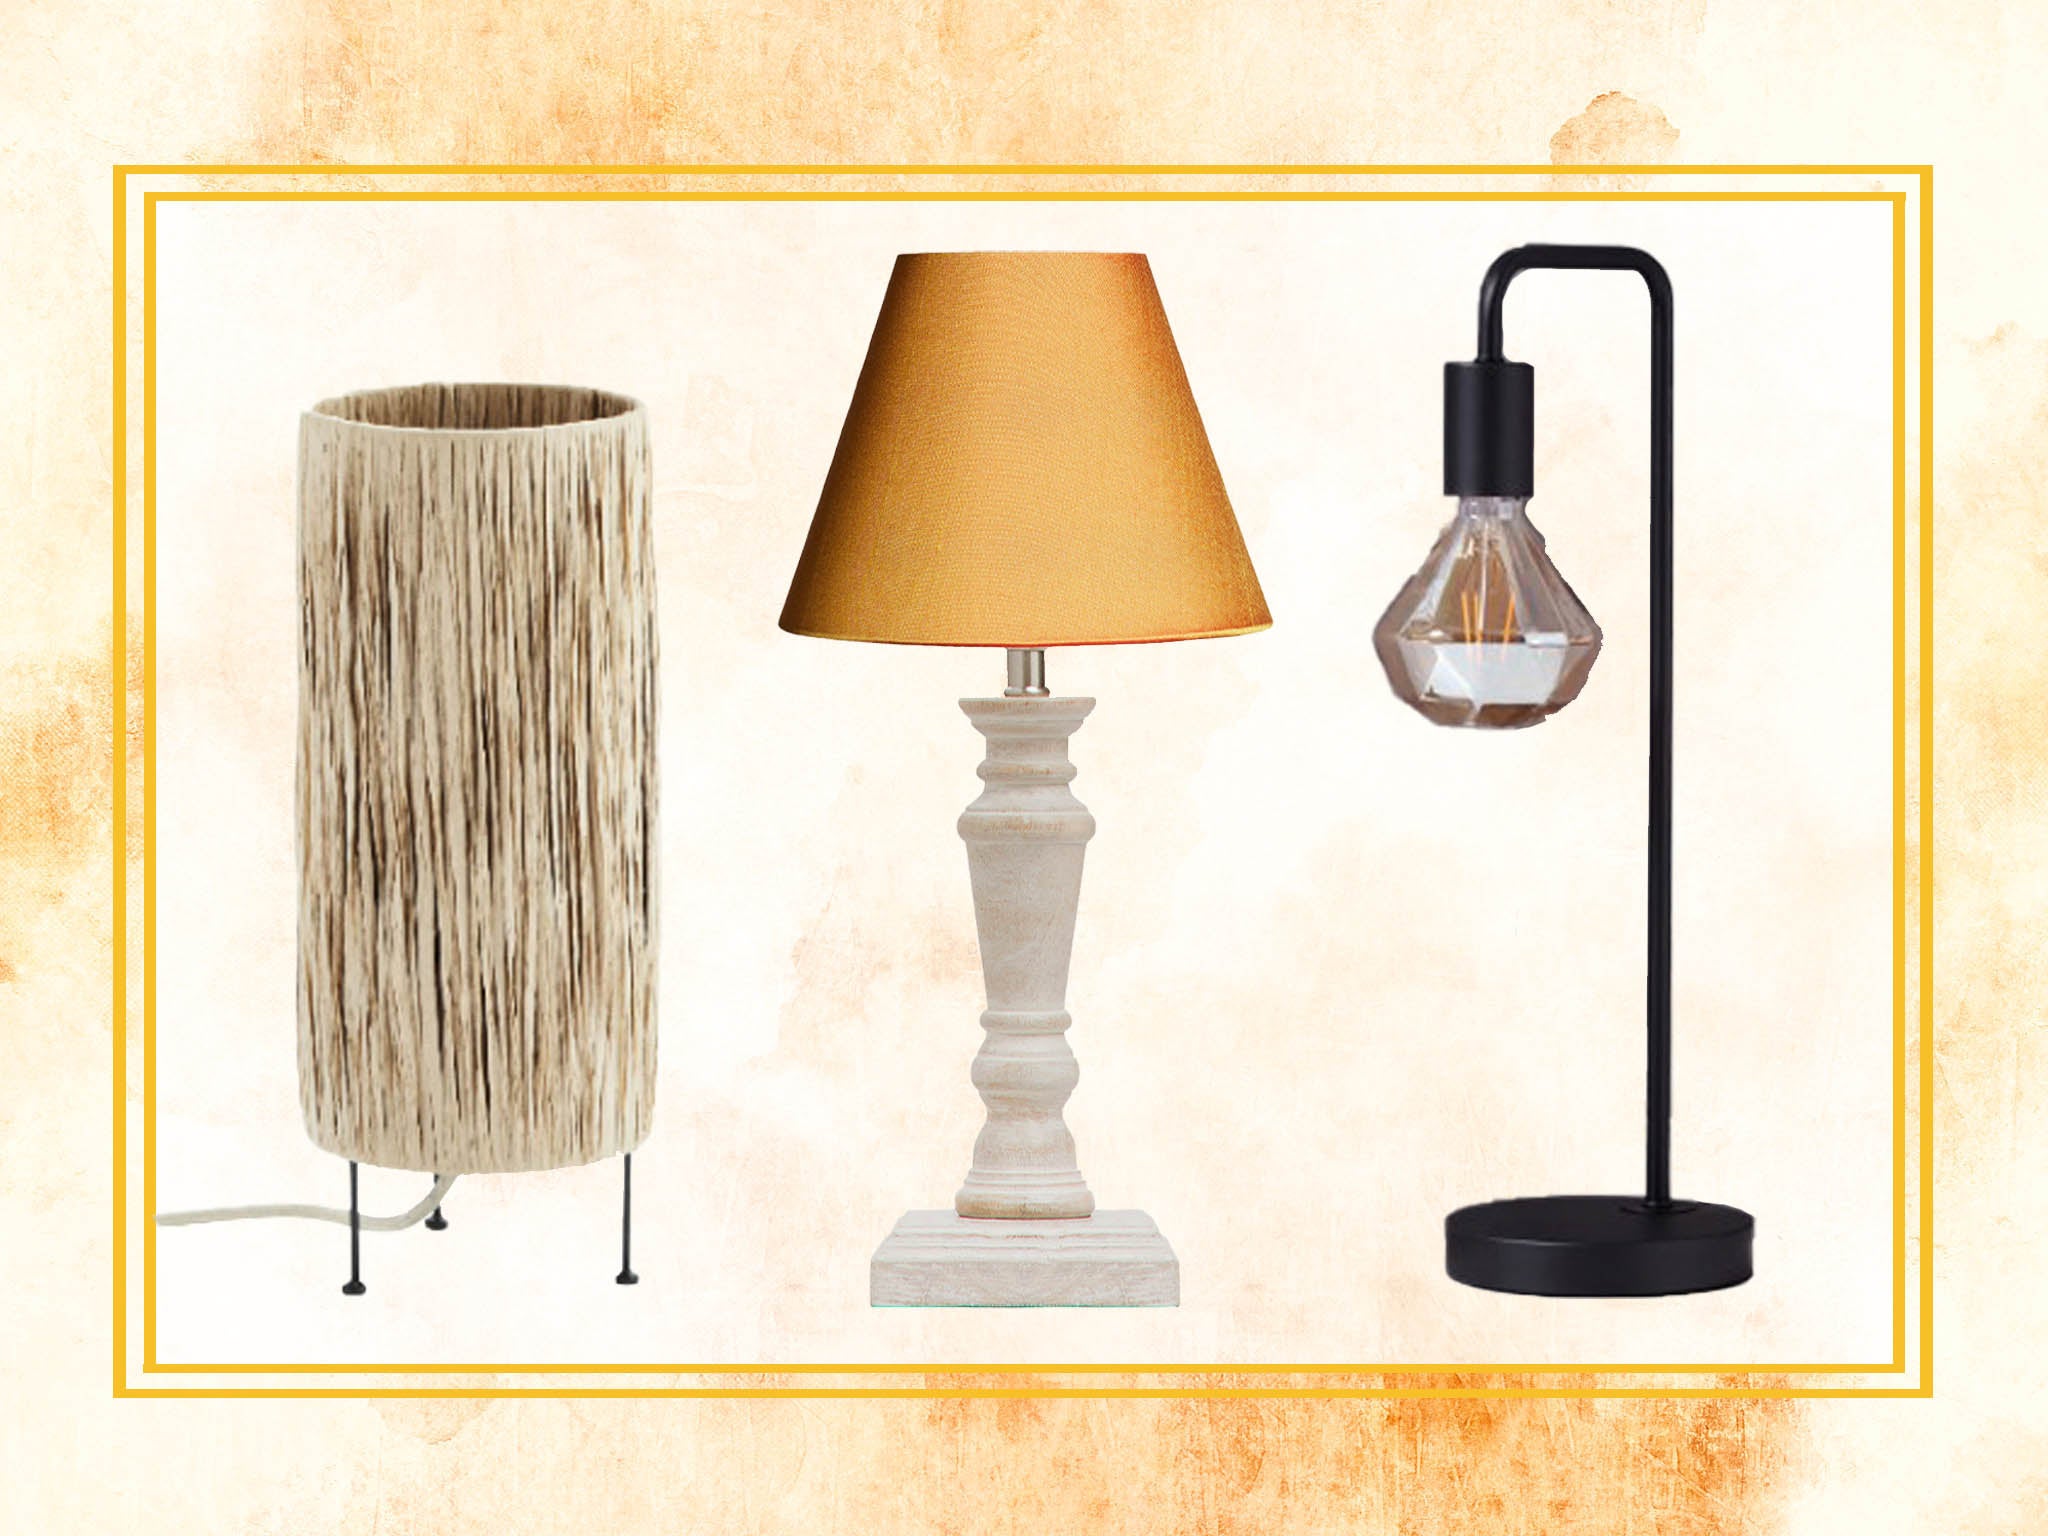 small bedside lamps uk